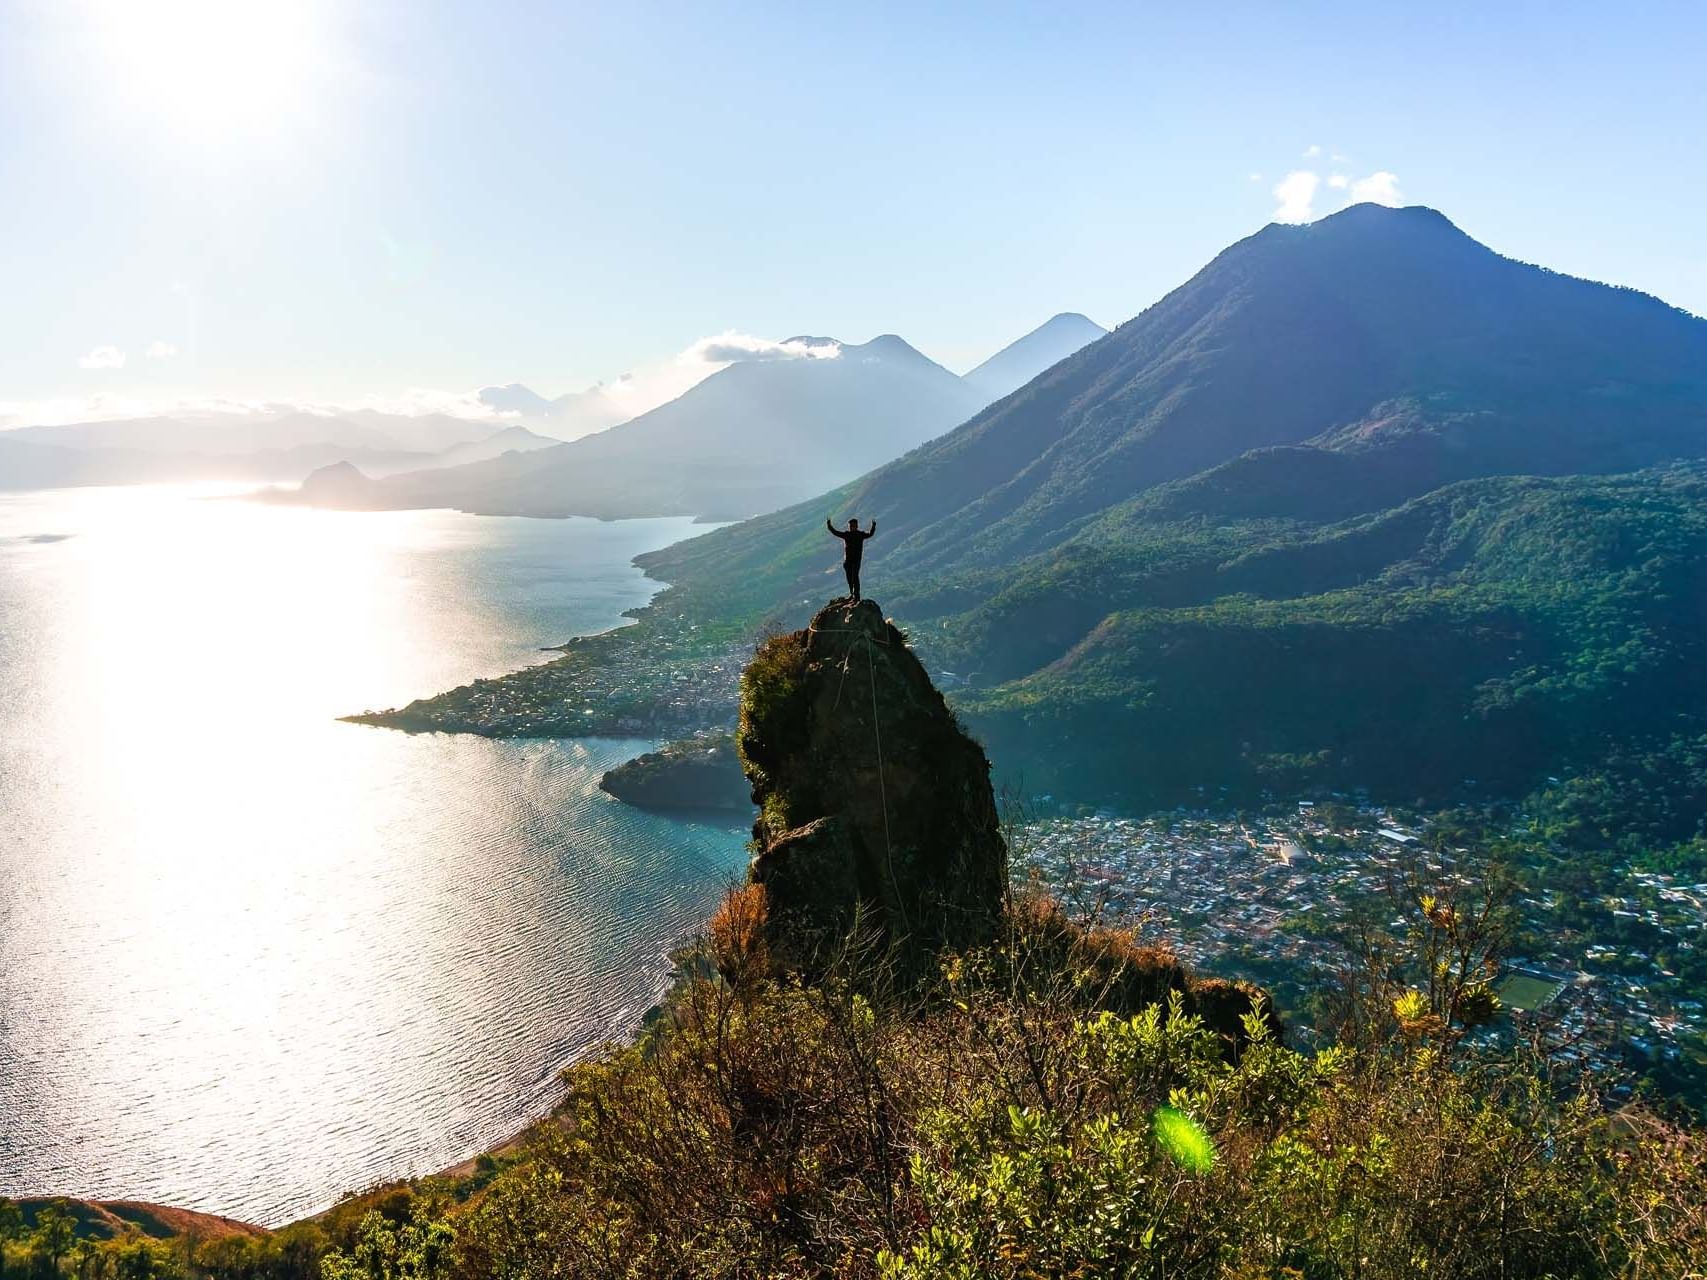 Aerial view of man standing on a viewpoint near Hotel Atitlan